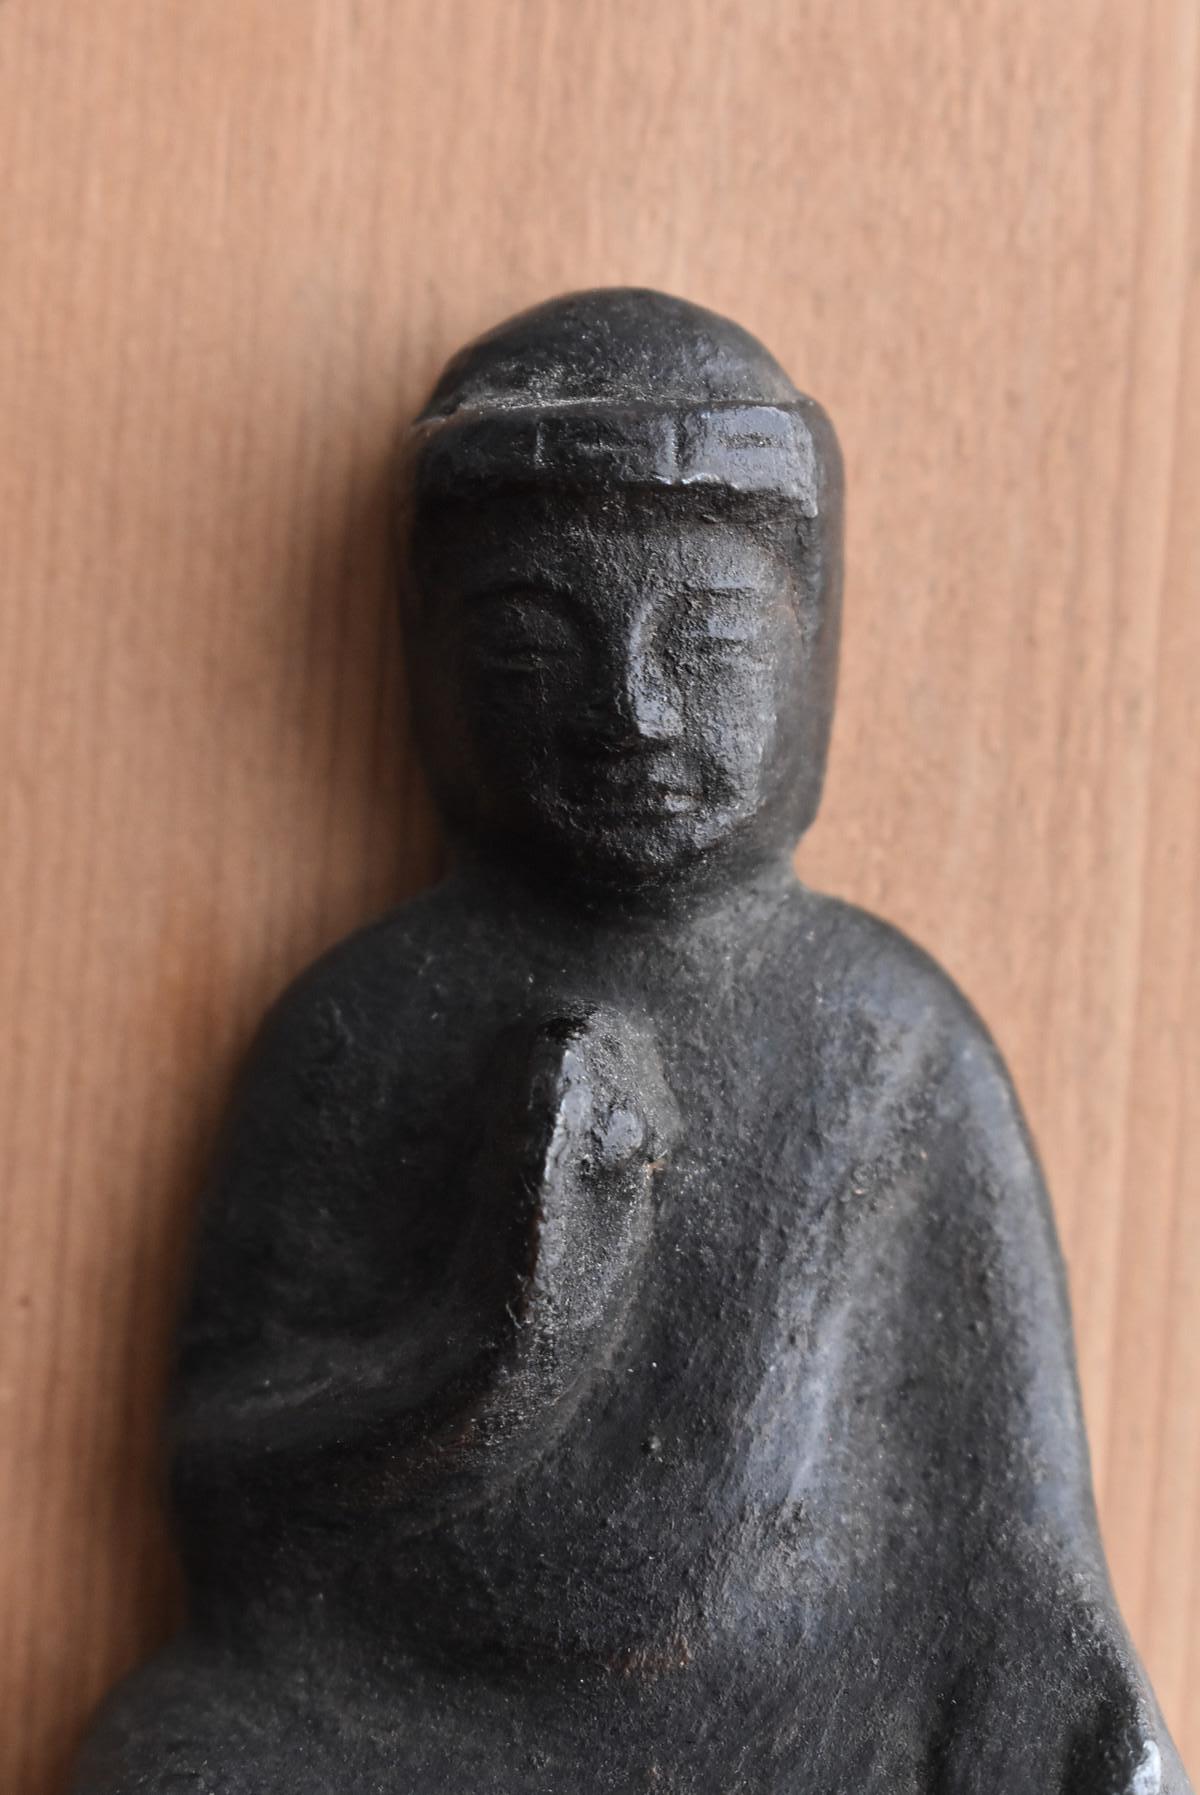 Arts and Crafts Japanese Antique 14th-16th Century Small Copper Buddha Statue or kakebutu